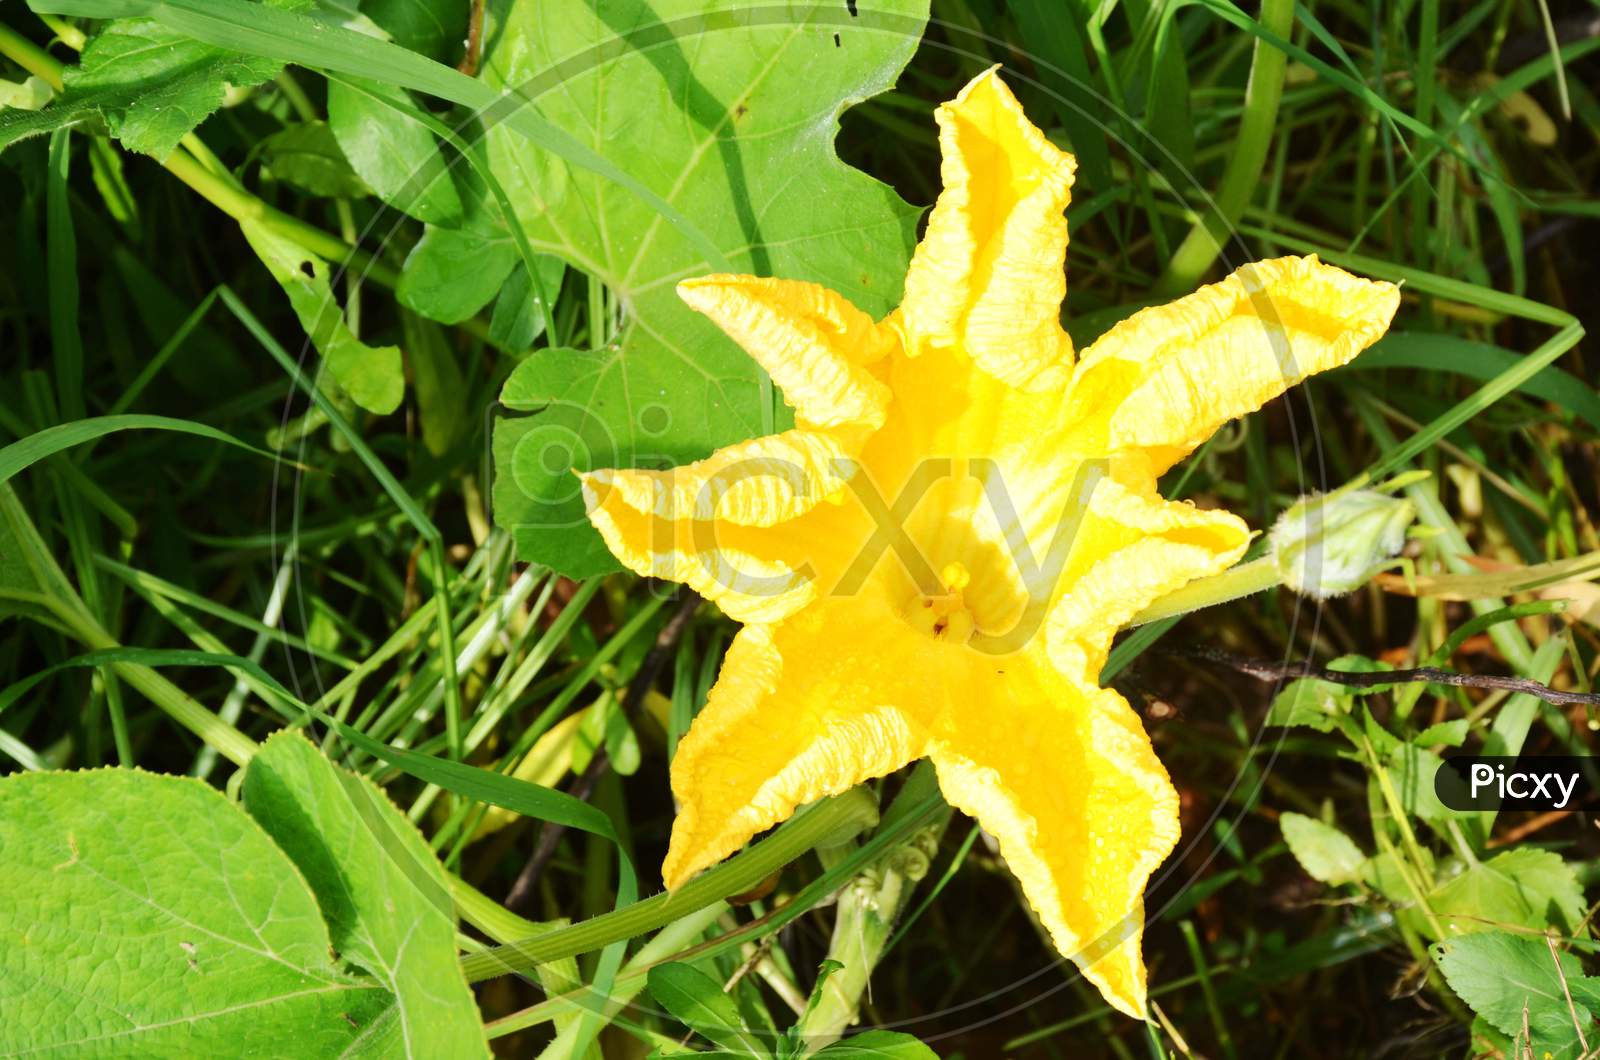 the yellow pumpkin flower with green leaves and vine.